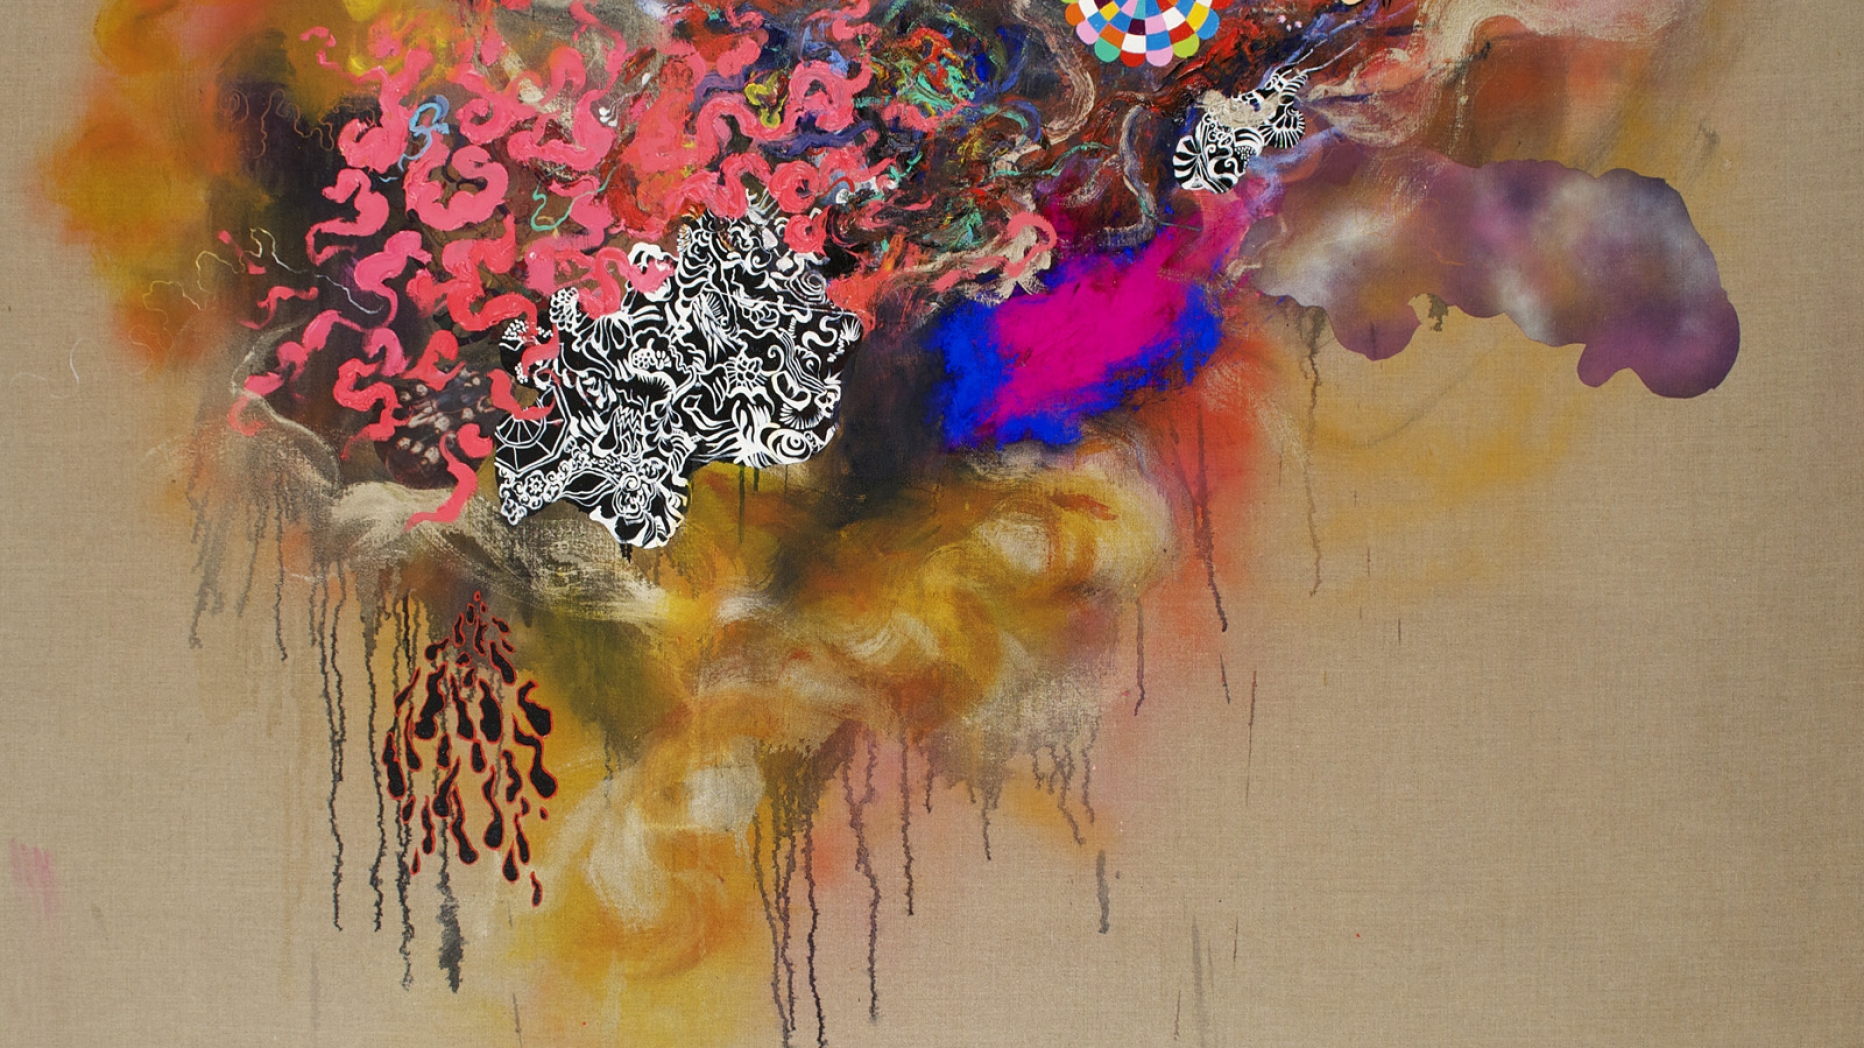 Transformations of Great Obscurity, 2013, oil and mixed media on linen, 60" x 72"